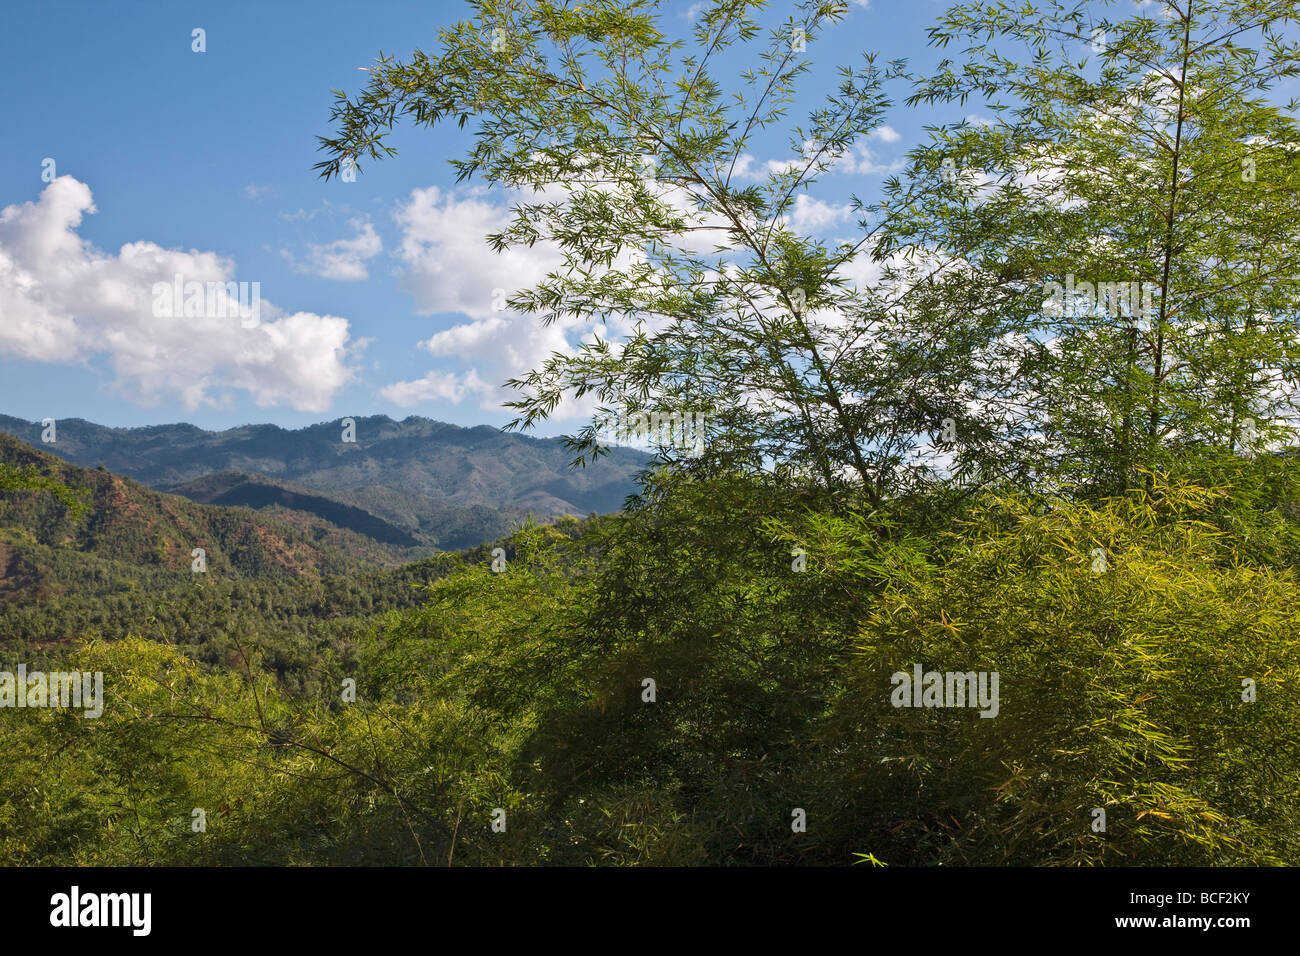 Myanmar, Burma, Kengtung. A section of the Shan Mountains with bamboo growing in the foreground. Stock Photo